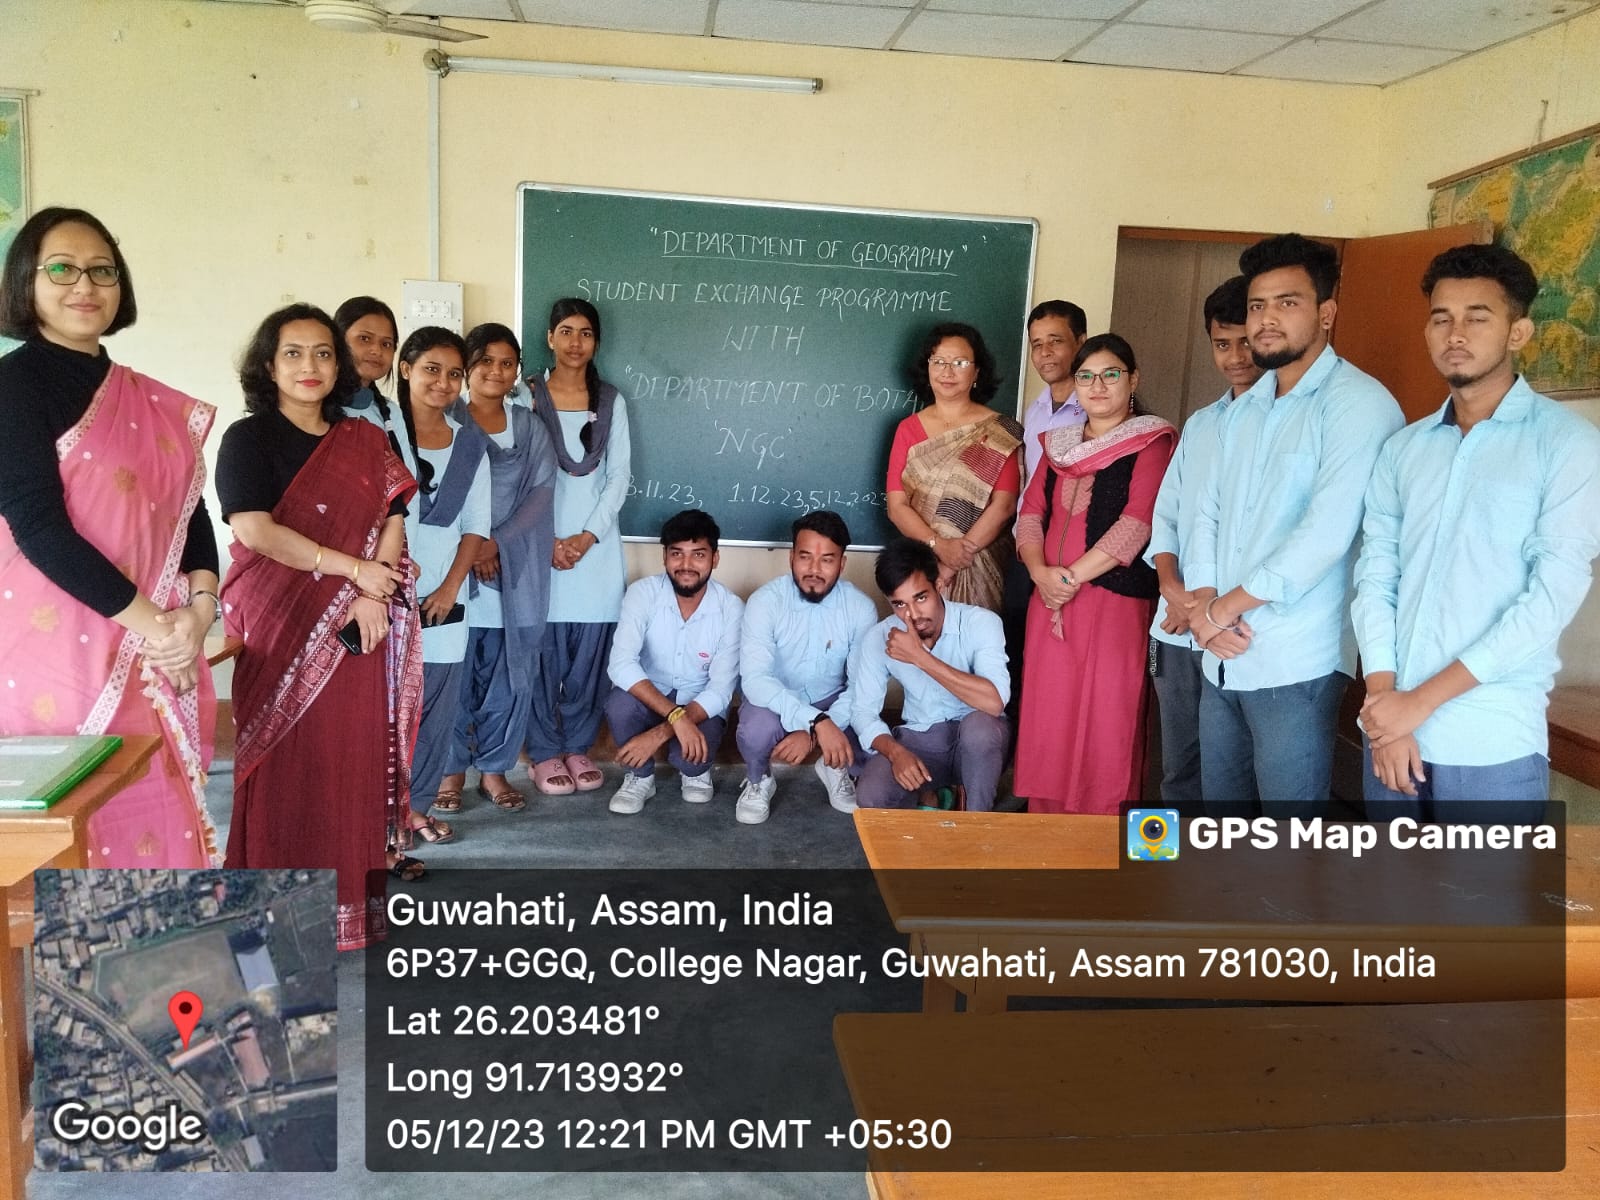 Student's Exhange Program between Dept. of Geography and Dept. of Botany (5th semester honors) on GIS and GPS held in the Geography Lab on 23.11.2023, 01.12.2023 and 05.12.2023